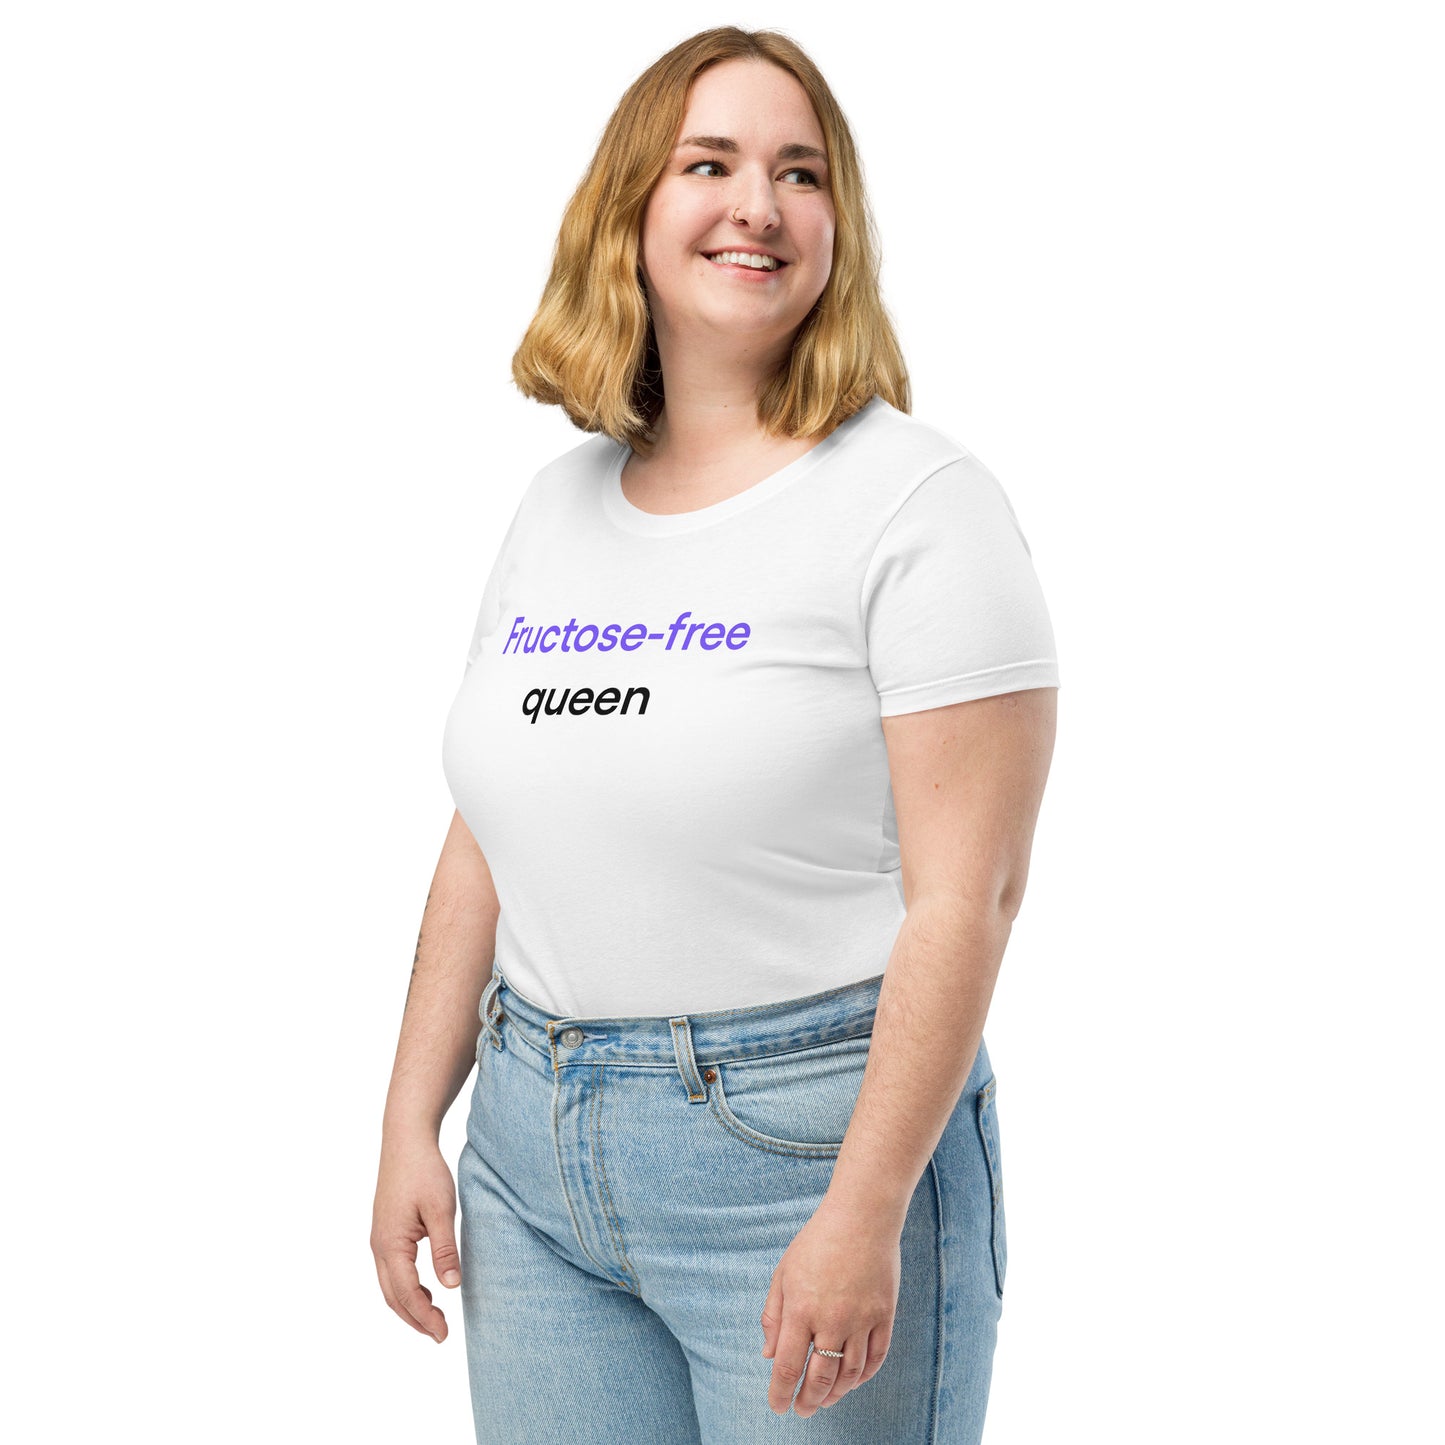 Fructose-free queen | Women’s fitted t-shirt